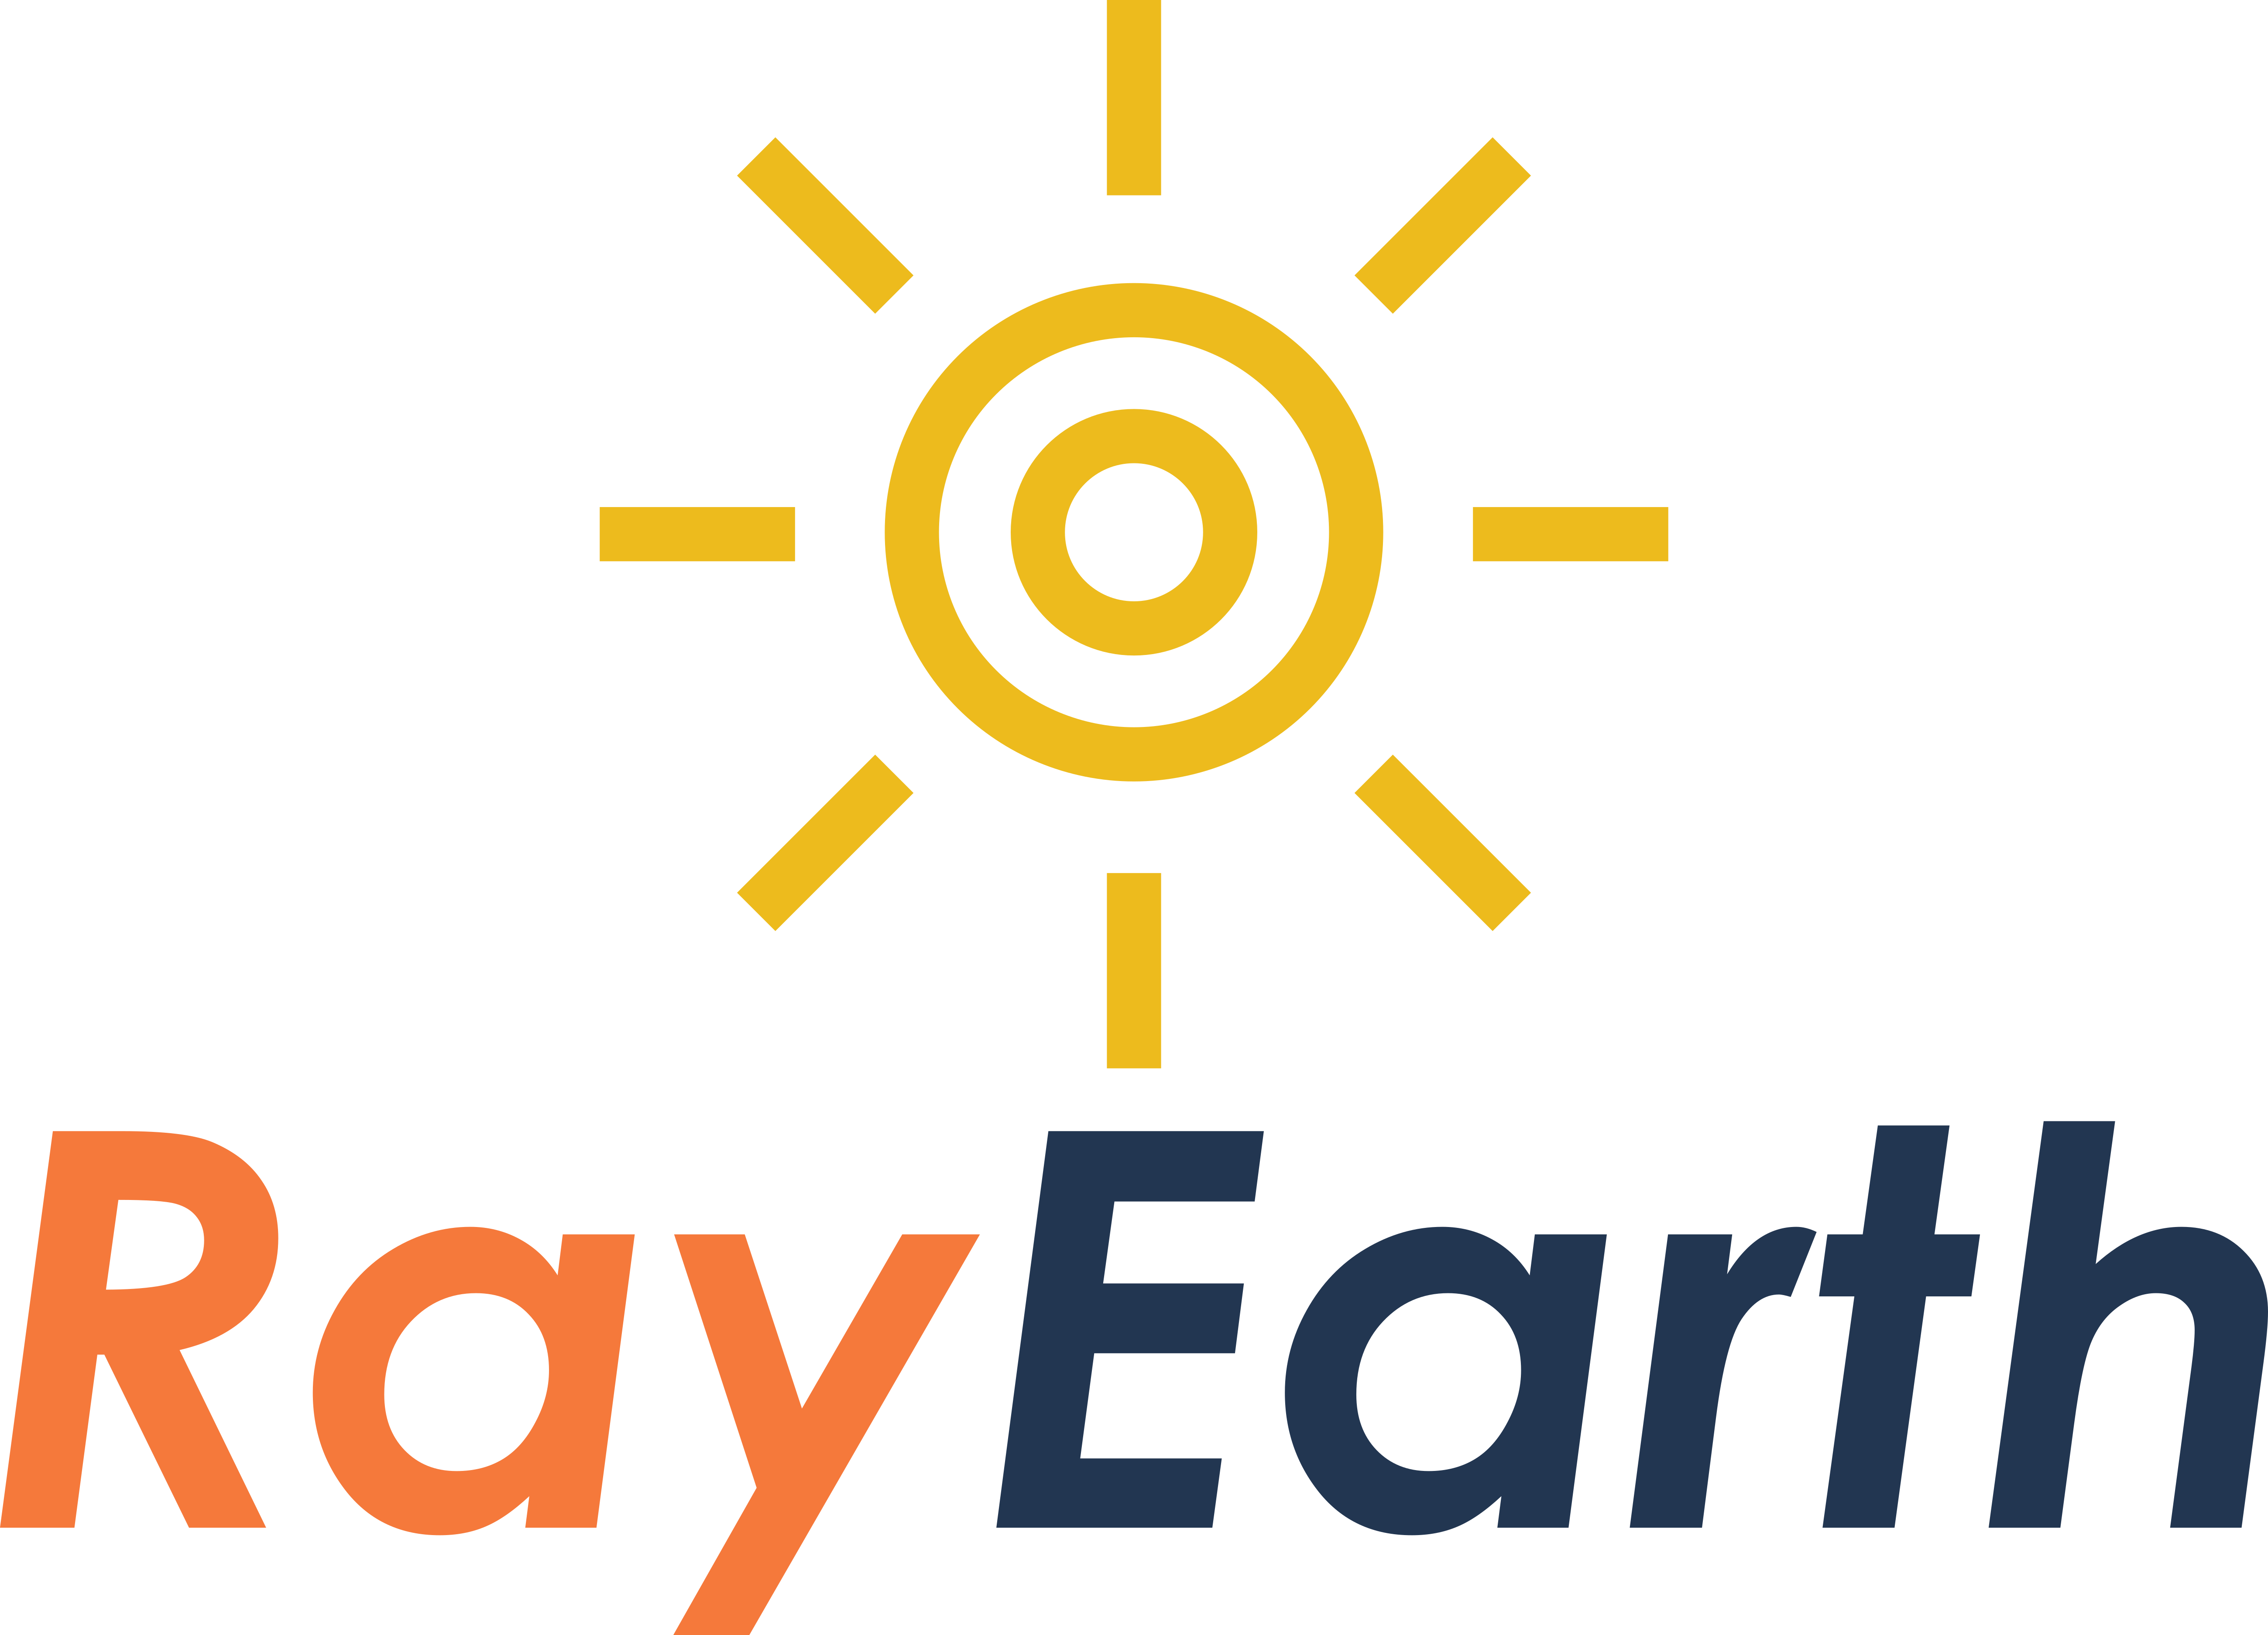 RayEarth Resources LLP